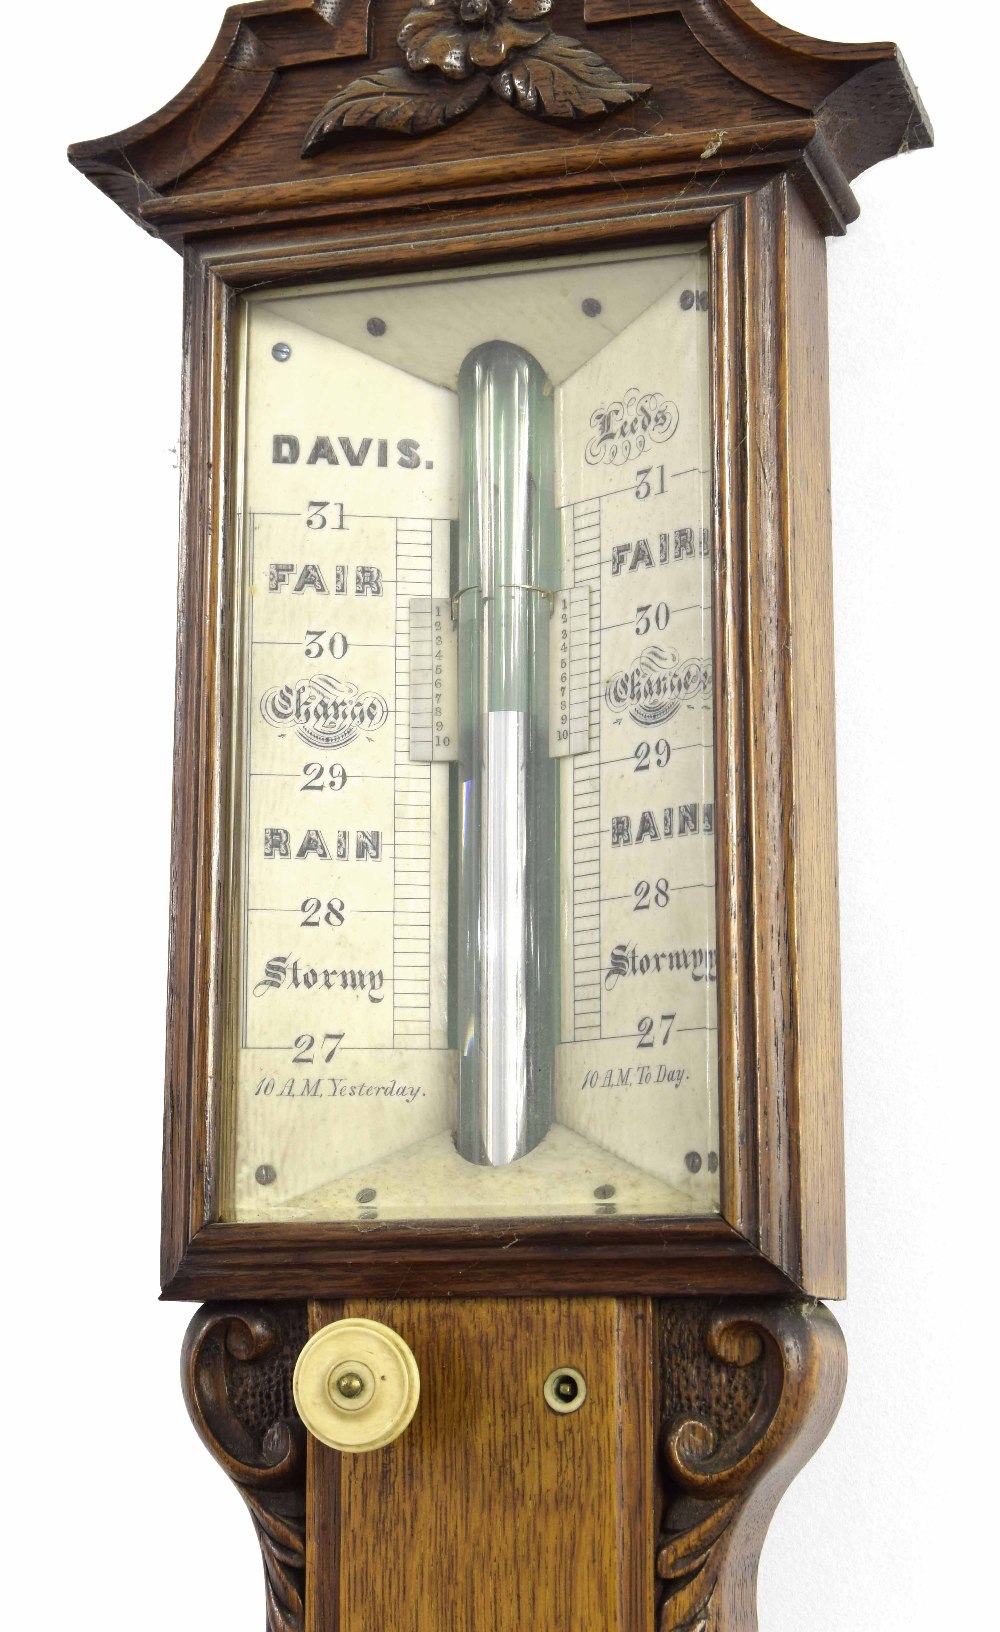 Good oak stick barometer/thermometer signed Davis, Leeds on the angled ivory plate, over a flat - Image 2 of 3